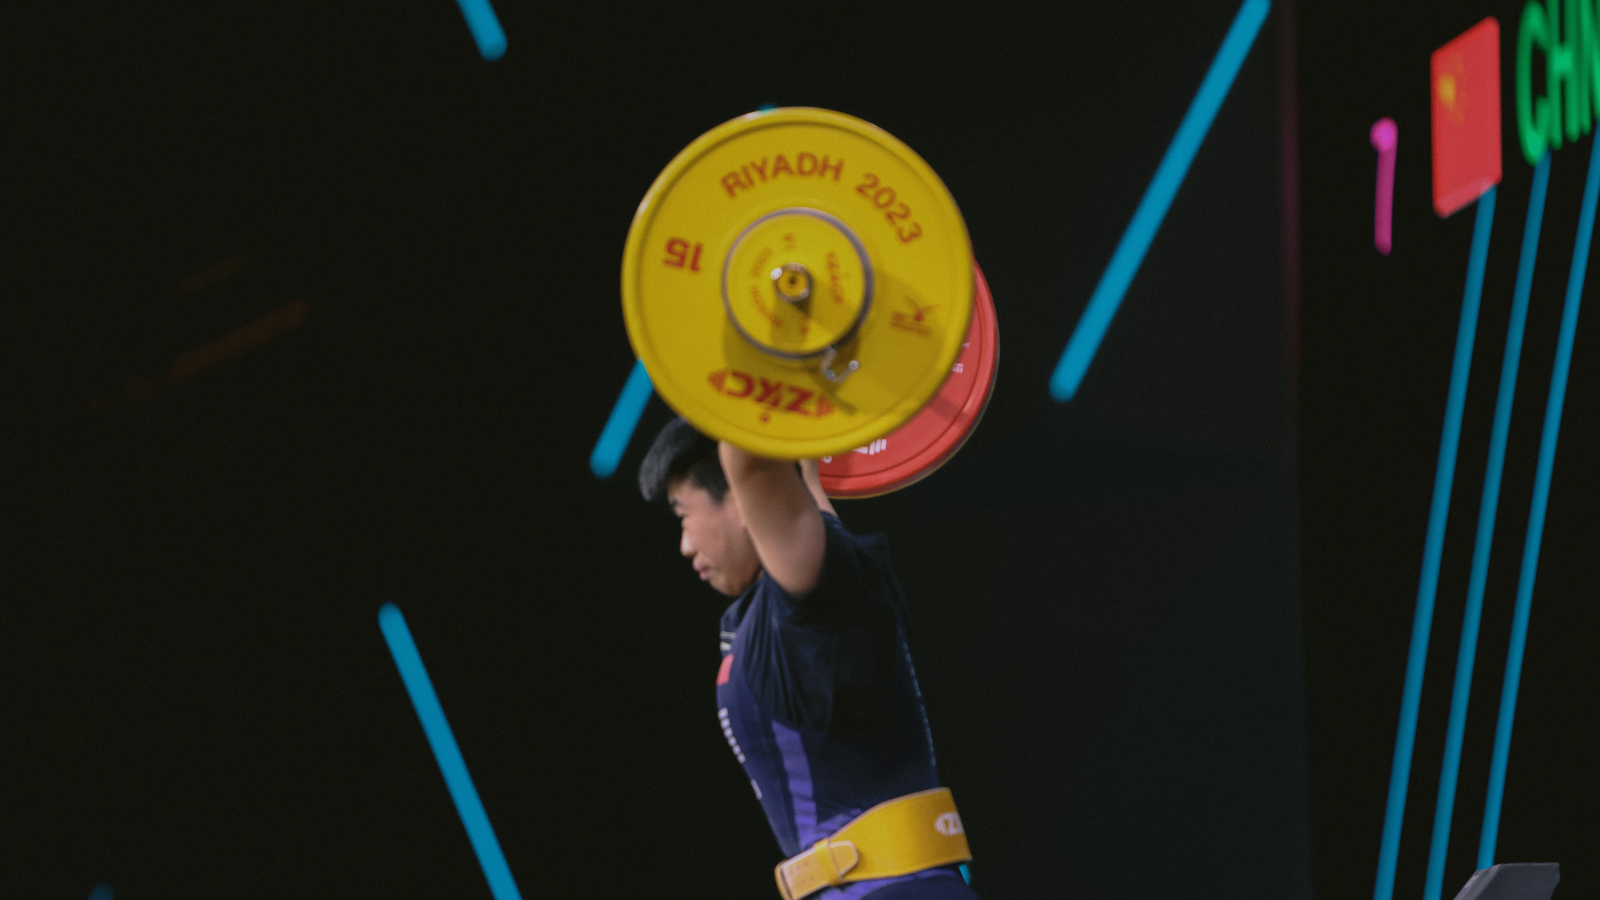 19-year-old Phil Duke Jr. sets weightlifting world records